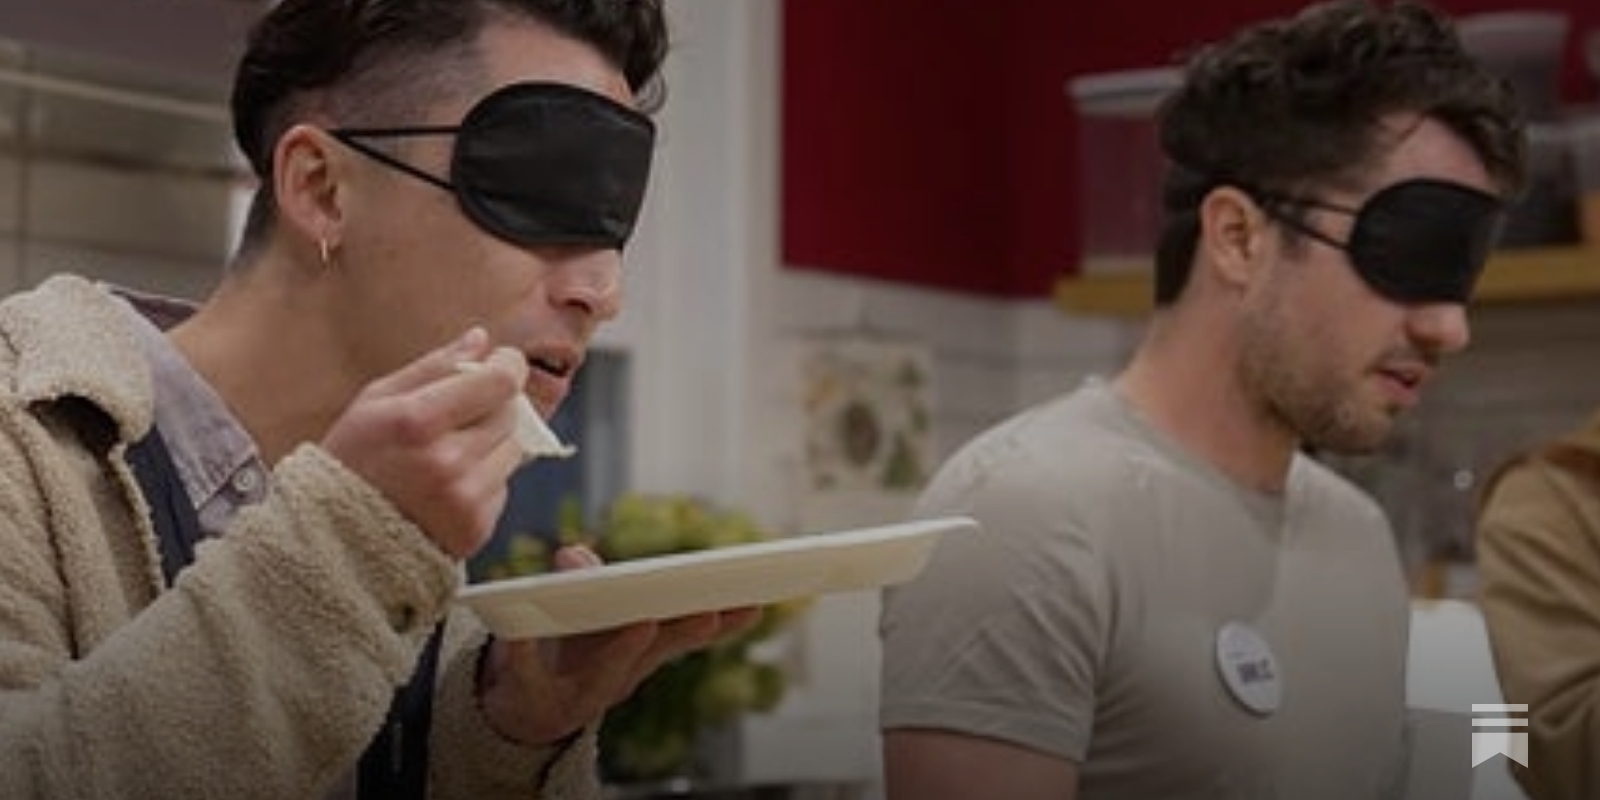 Master the Pan-Flip Move Any Pro Chef Can Do Blindfolded